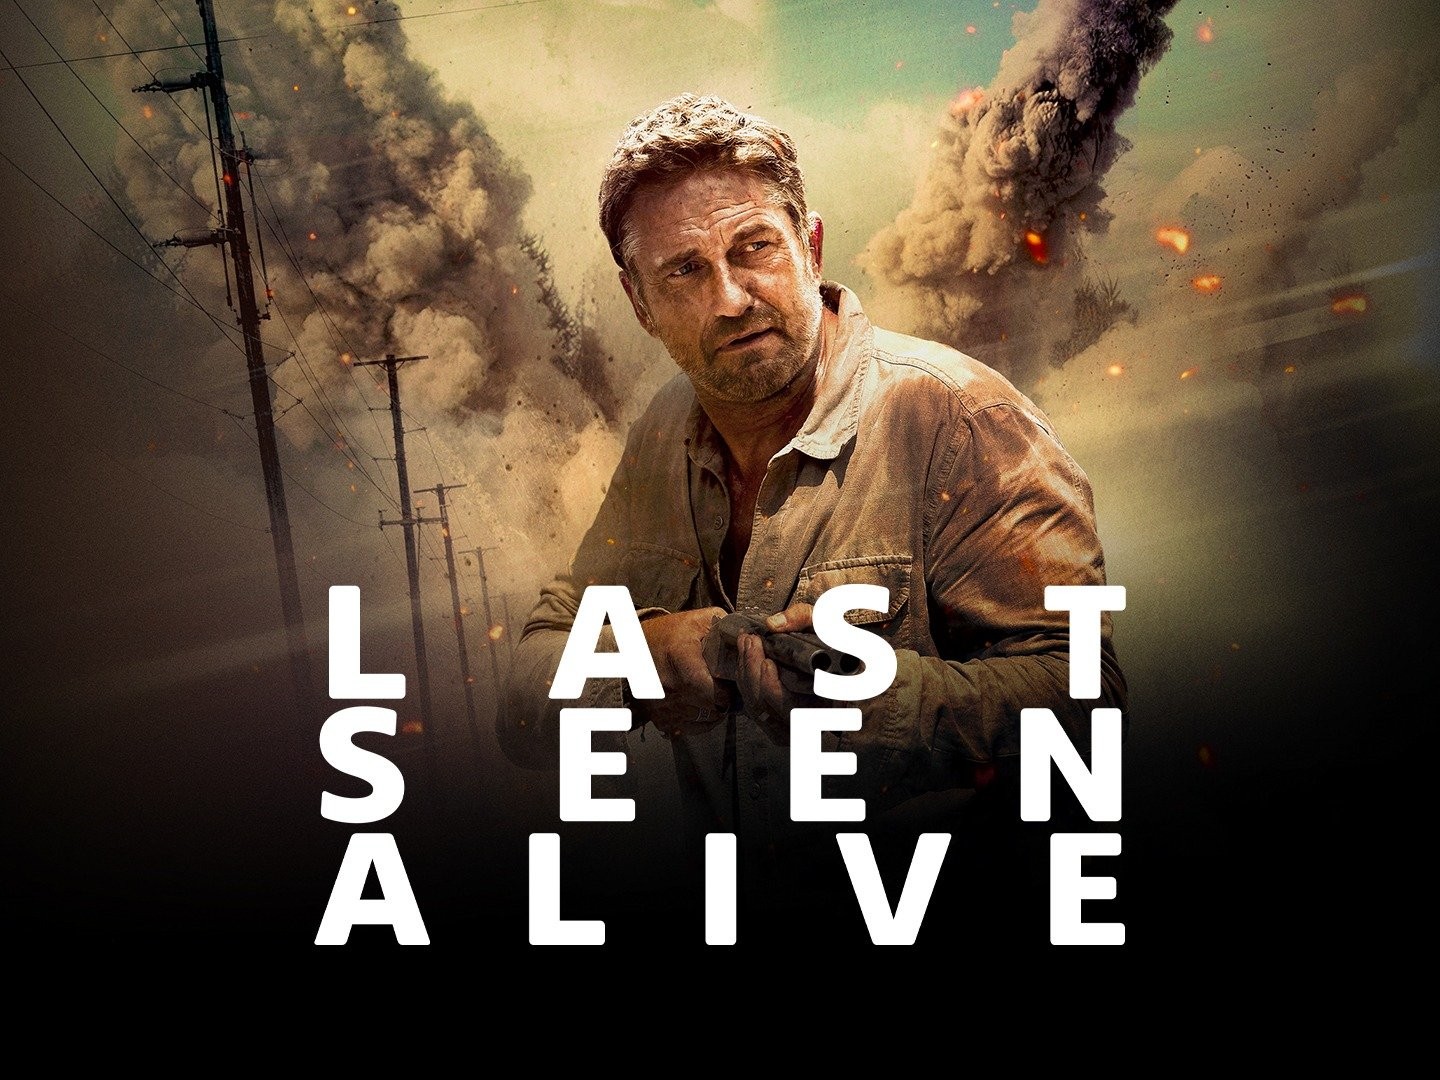 Mike's Movie Moments: Last Seen Alive - Just a Mediocre Action Thriller  Movie